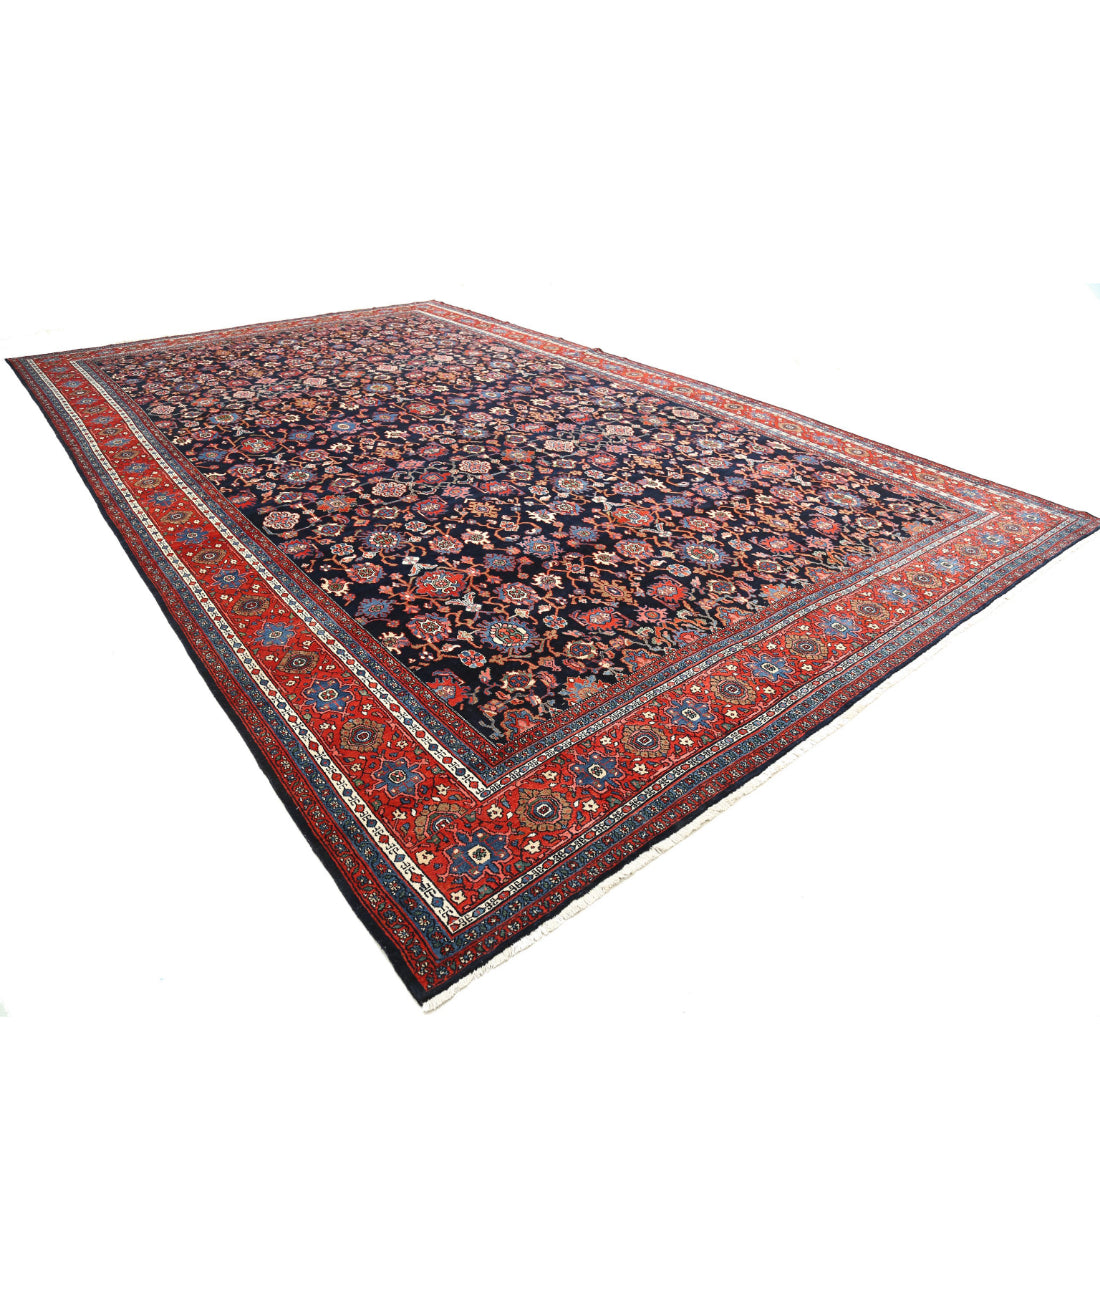 Bibikabad 12'8'' X 21'0'' Hand-Knotted Wool Rug 12'8'' x 21'0'' (380 X 630) / Black / Red